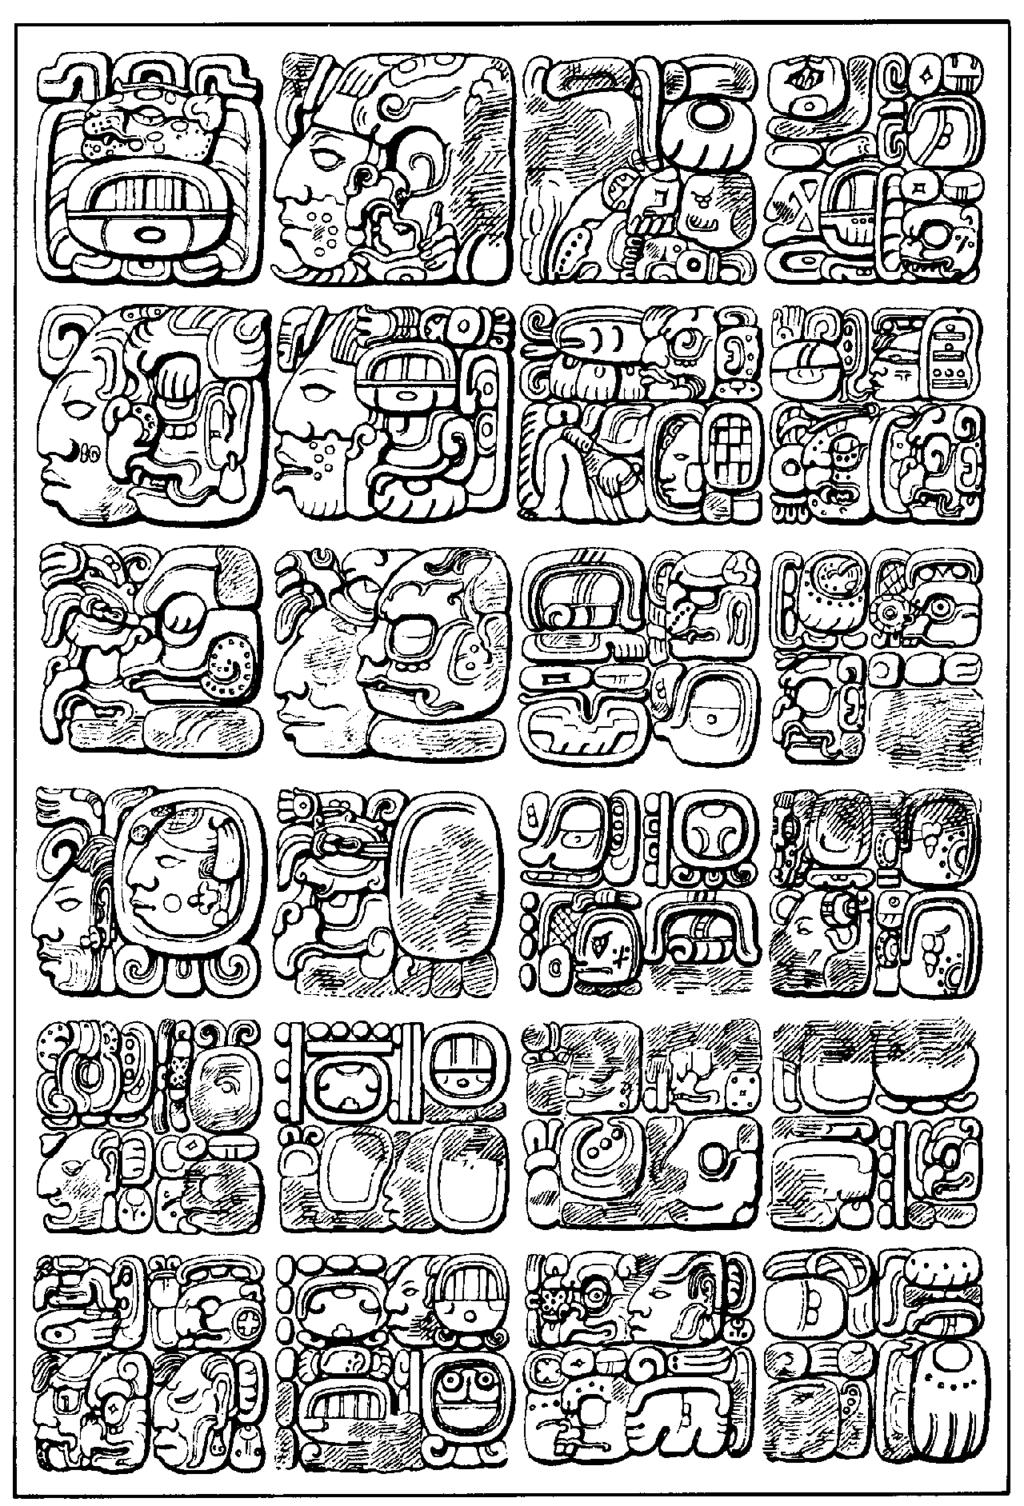 On the northern side, the date 7 Ben 11 Uo is followed by a glyph T23:130:181 in the Thompson (1962) system of transcribing the Maya glyphs, and a skull compound.